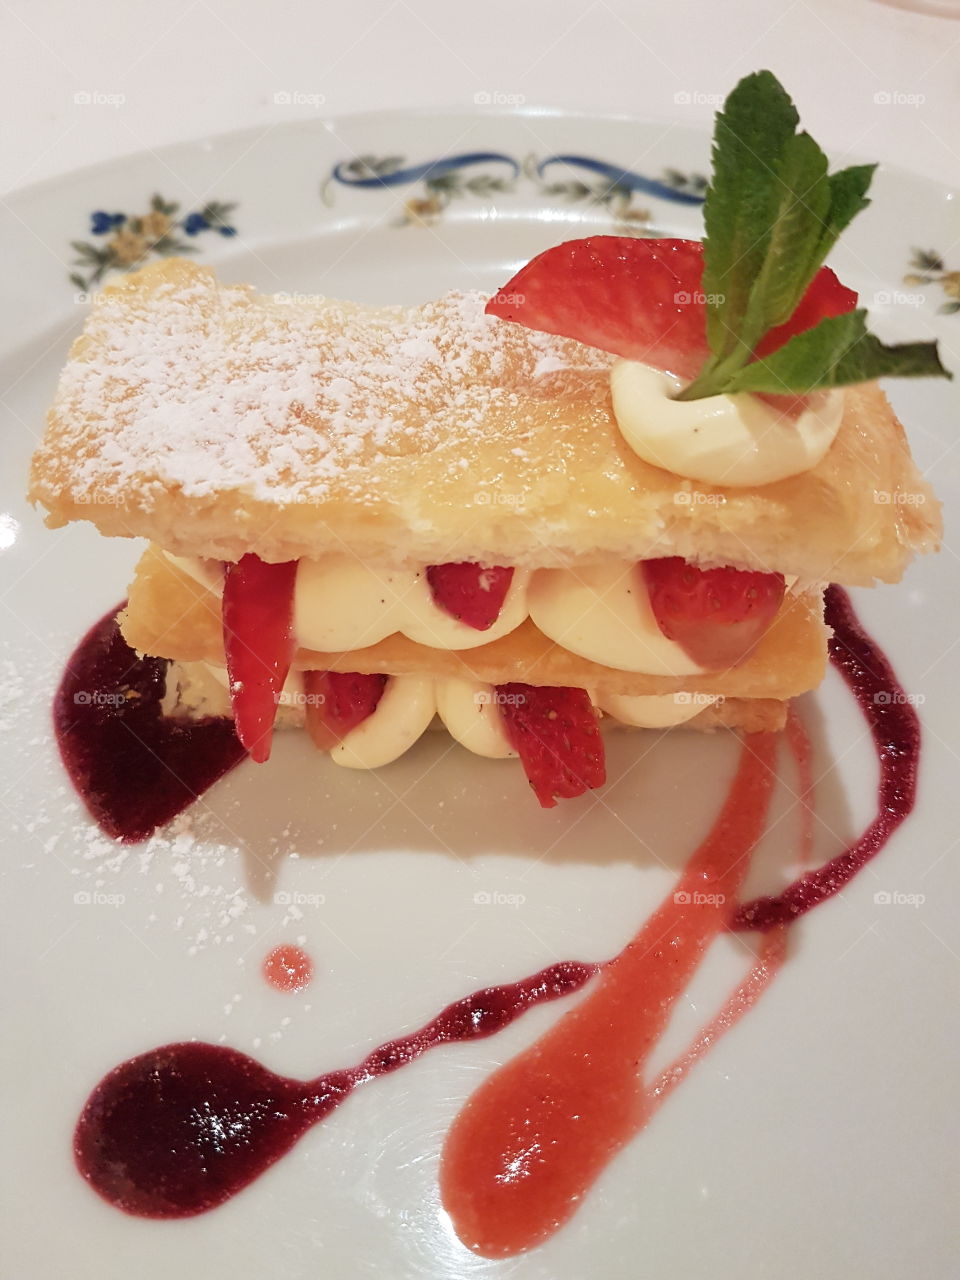 Delicious dessert with strawberries and Chantilly cream